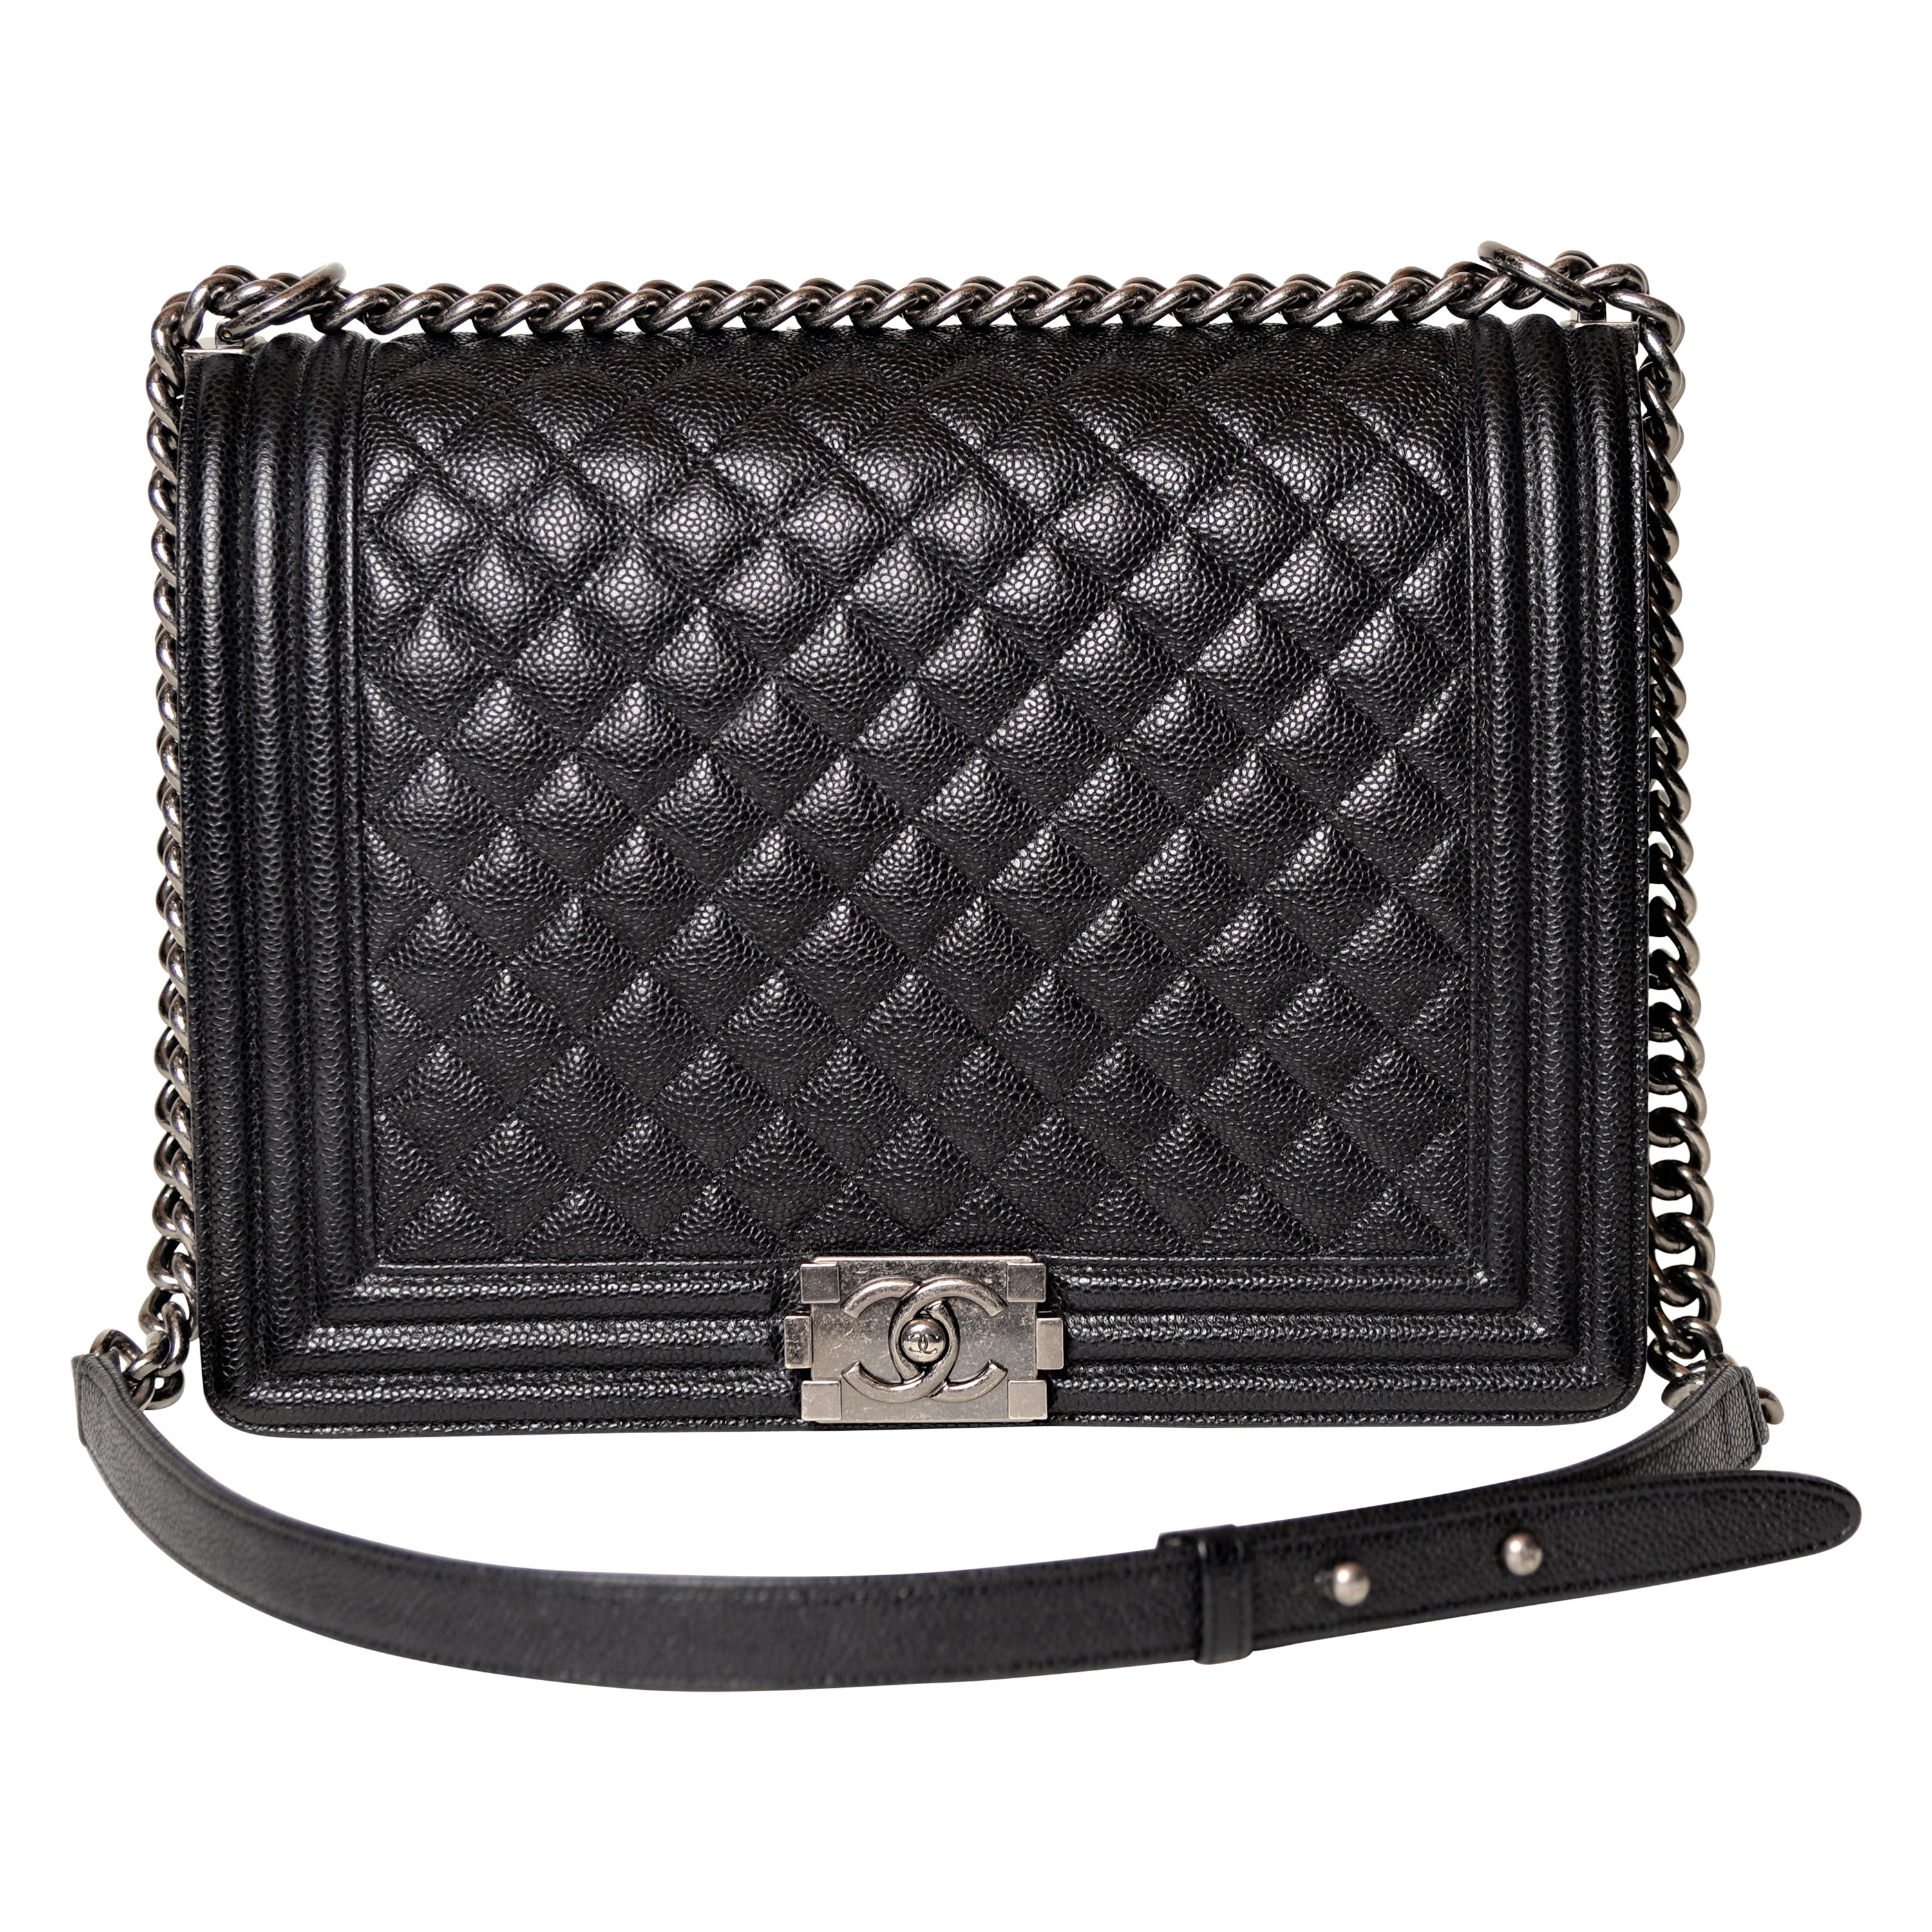 Chanel Boy Bag Black Large Quilted Caviar Leather 